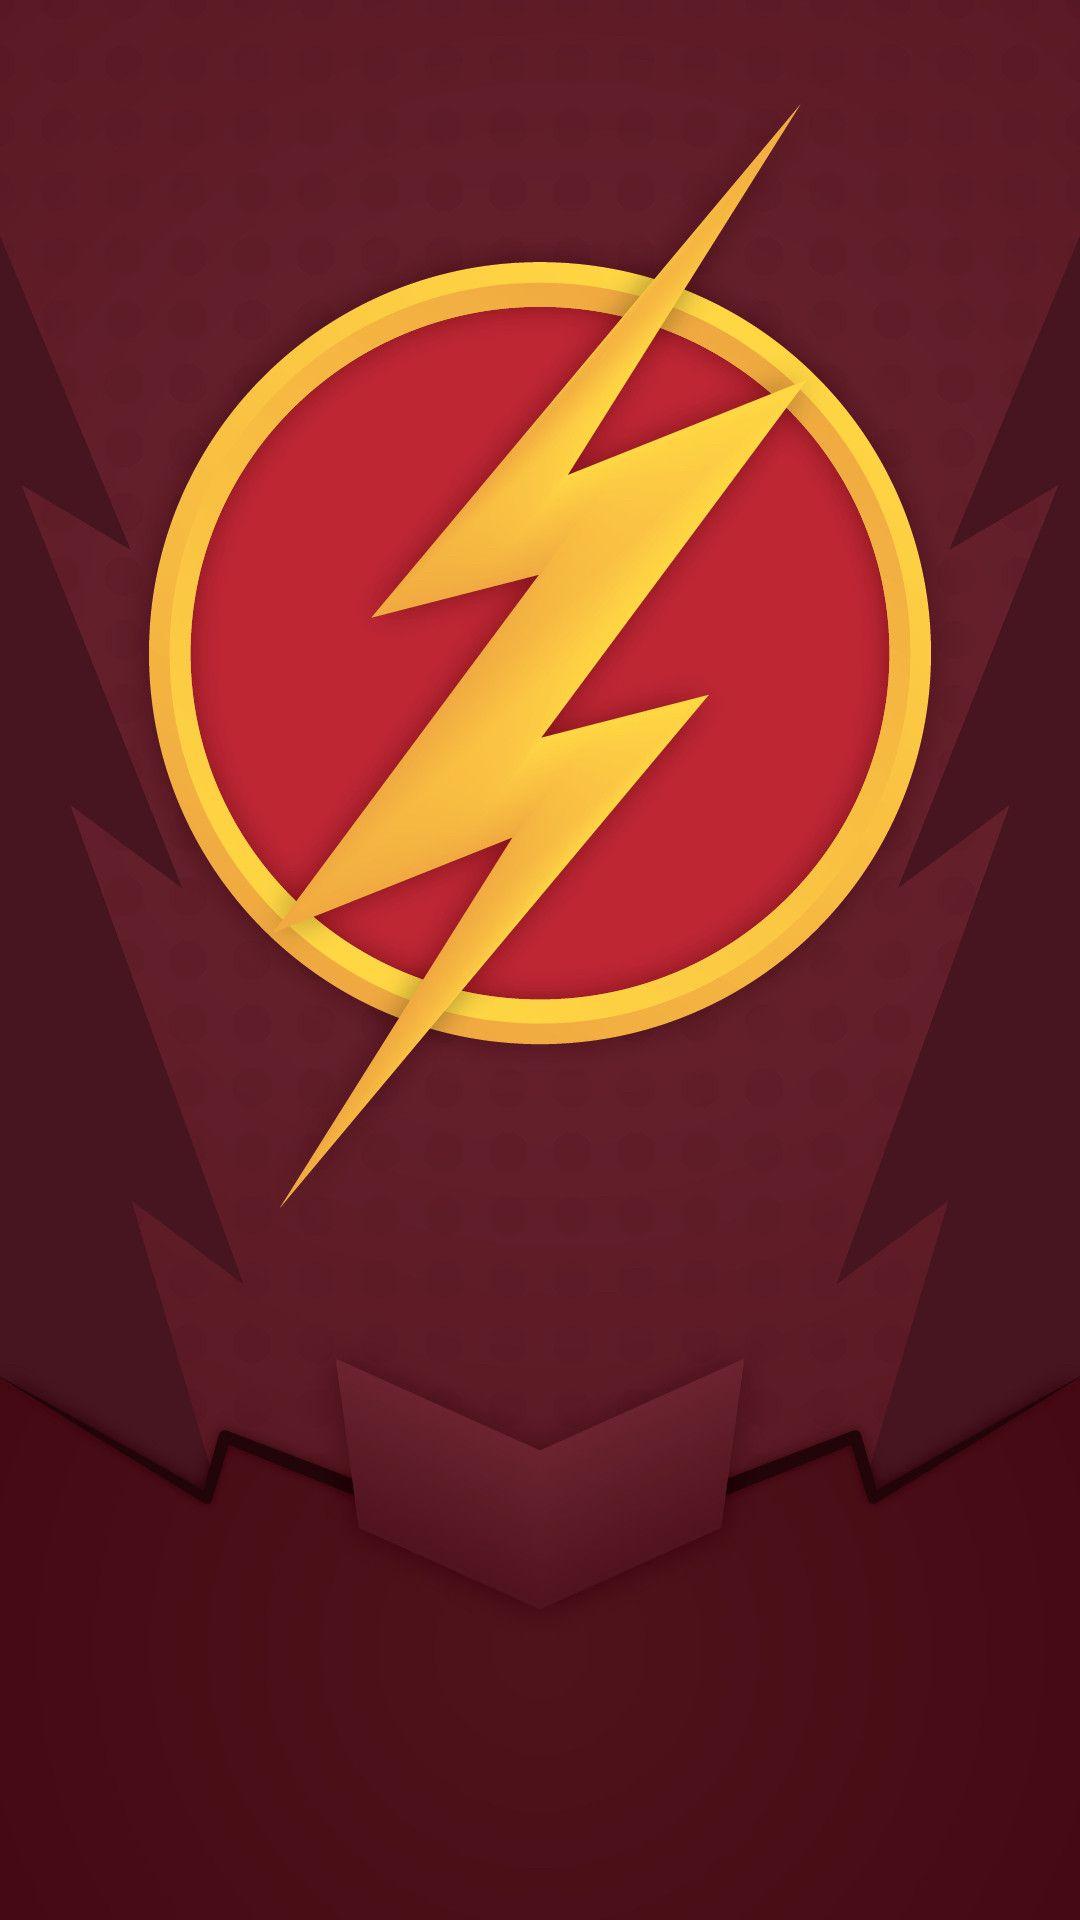 Fan ContentMy Android Theme Inspired by the Flash, Thought I